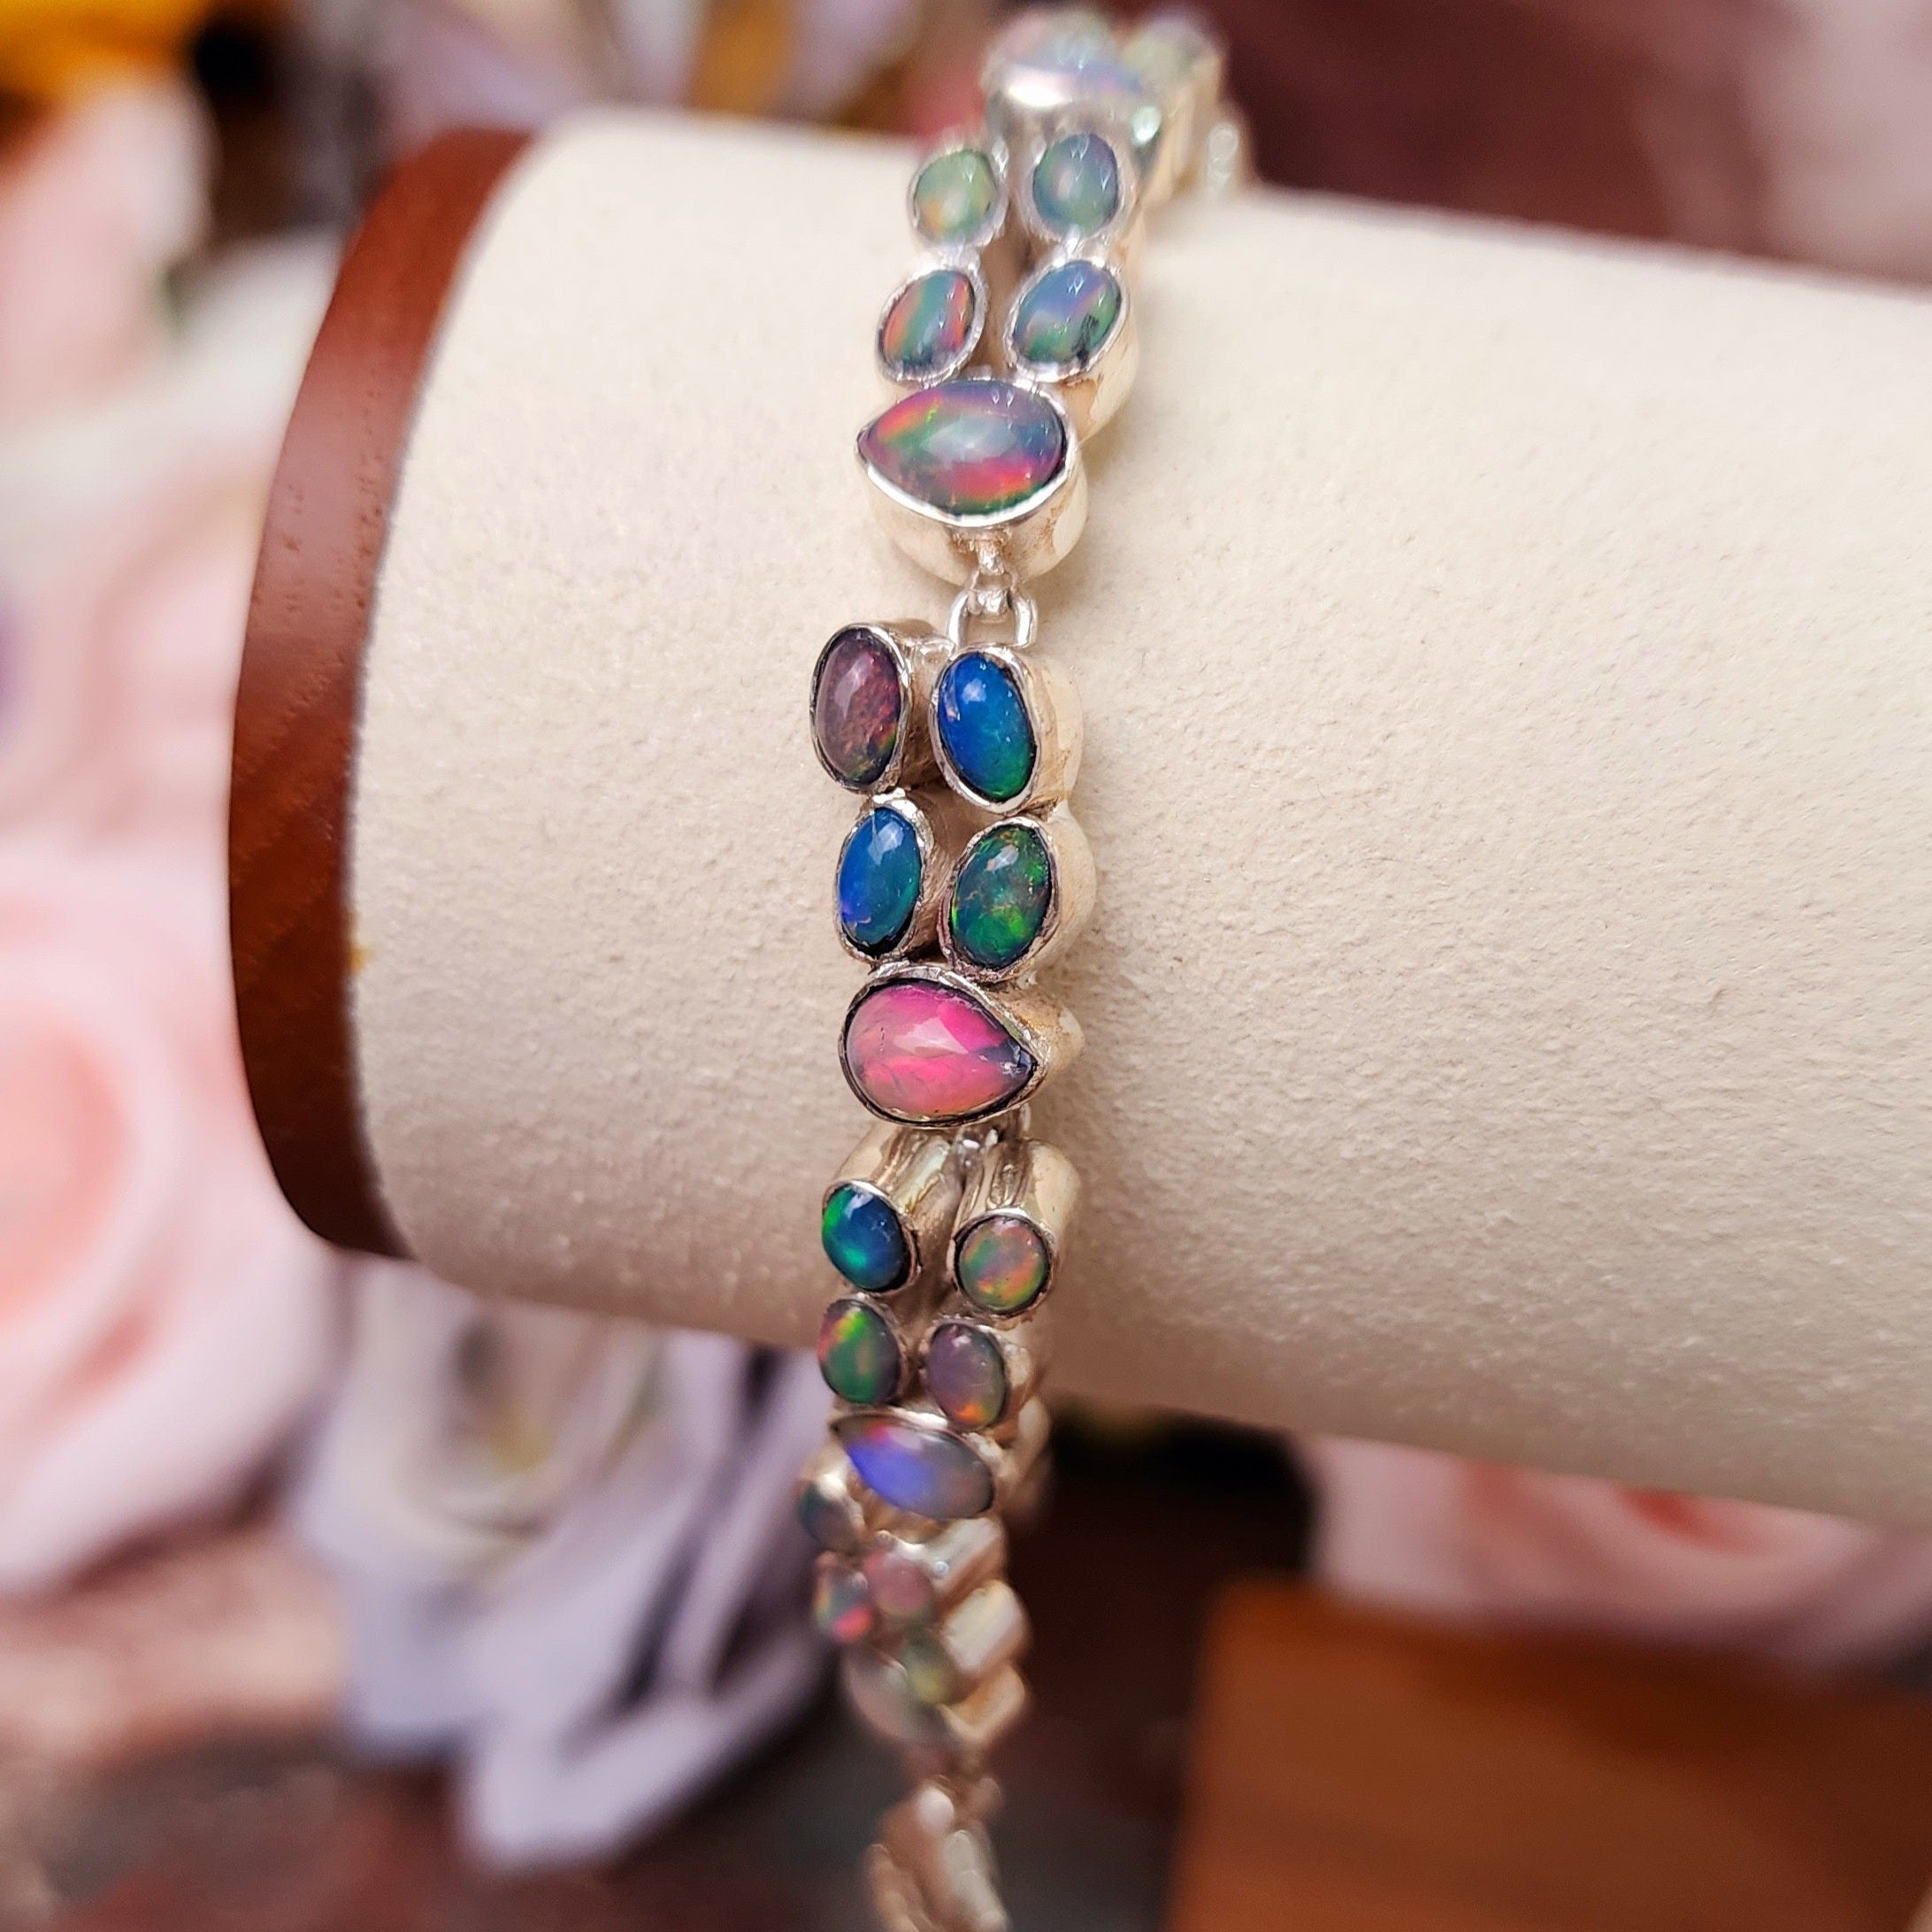 Ethiopian Opal .925 Silver Bracelet for Creativity, Joy and Self Discovery